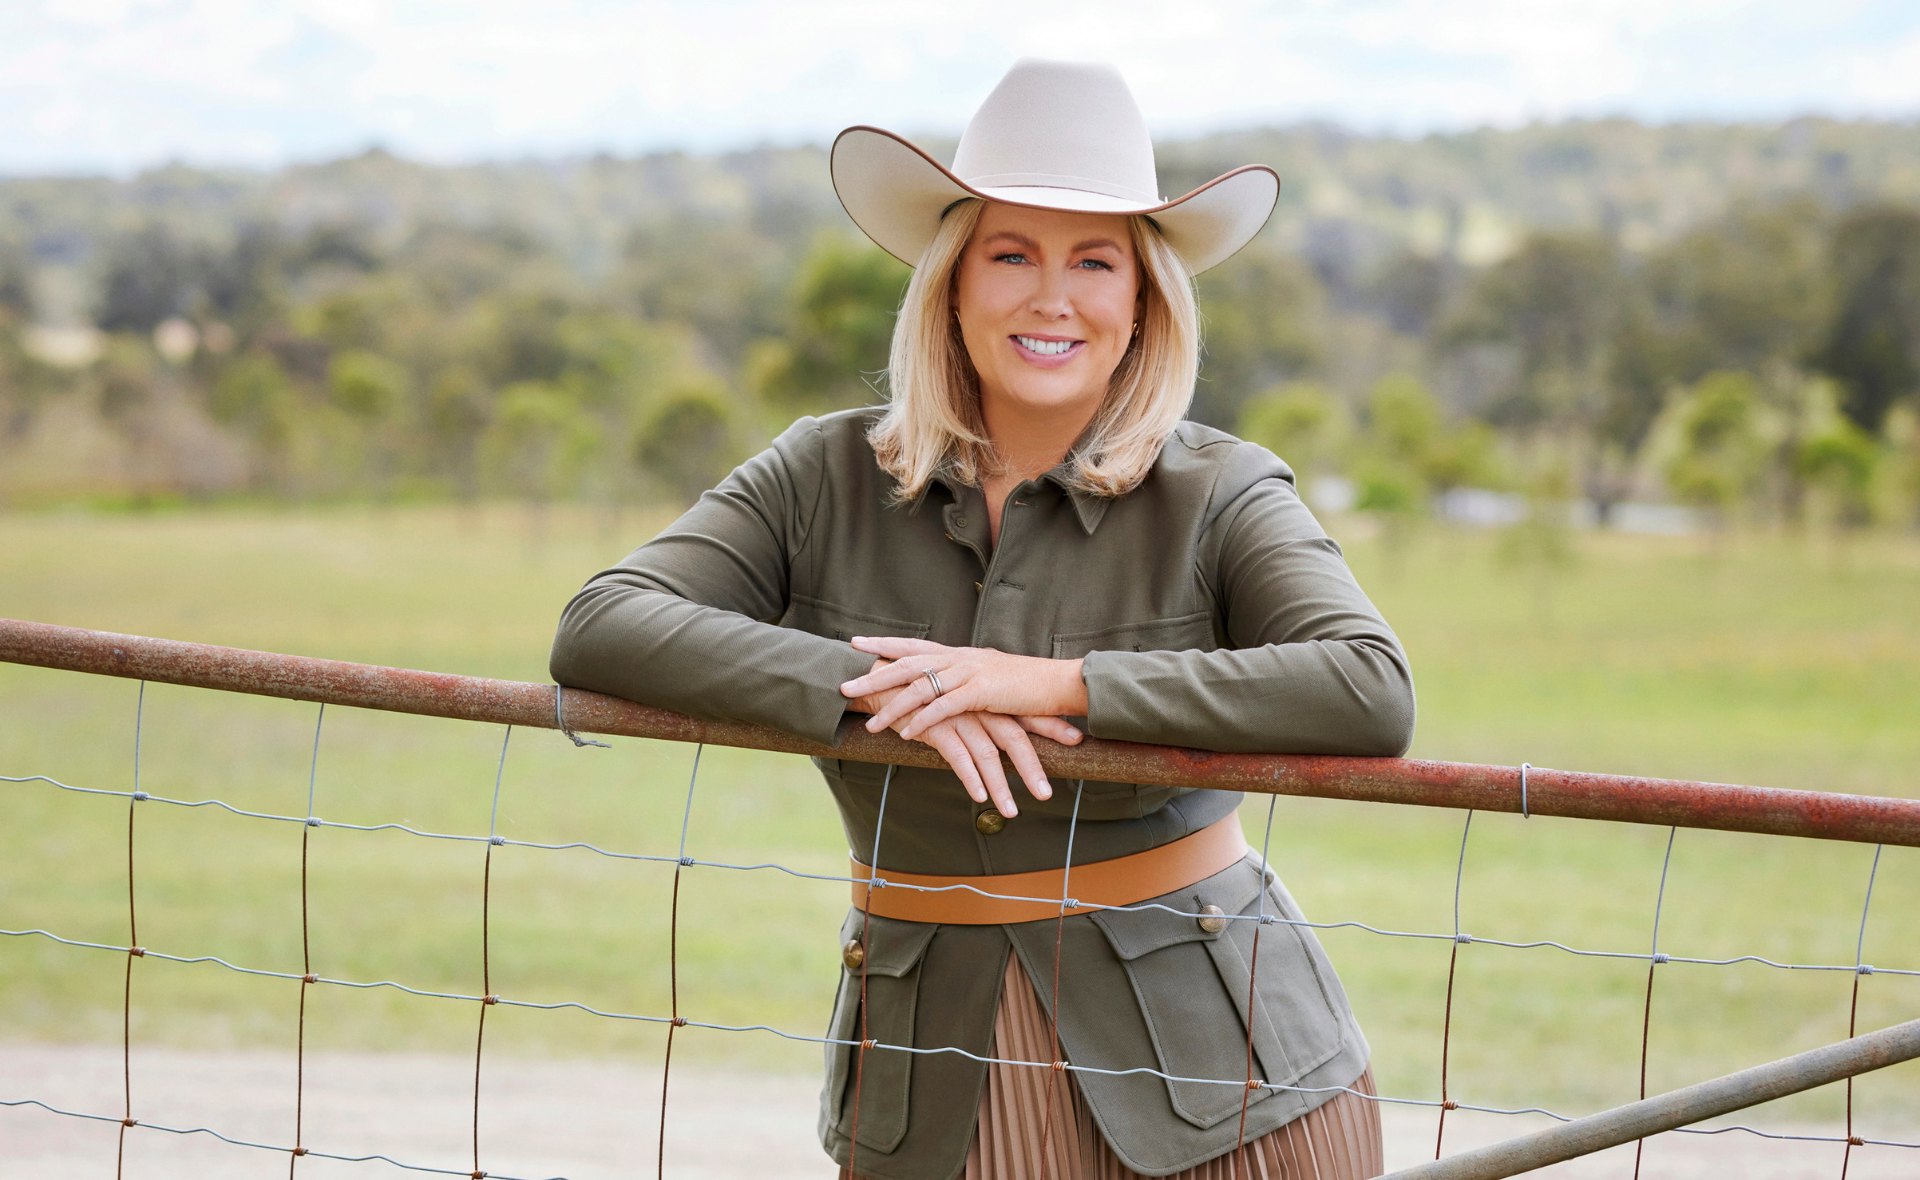 EXCLUSIVE: ”I’m proud of myself” says Samantha Armytage of her decision to leave Sunrise